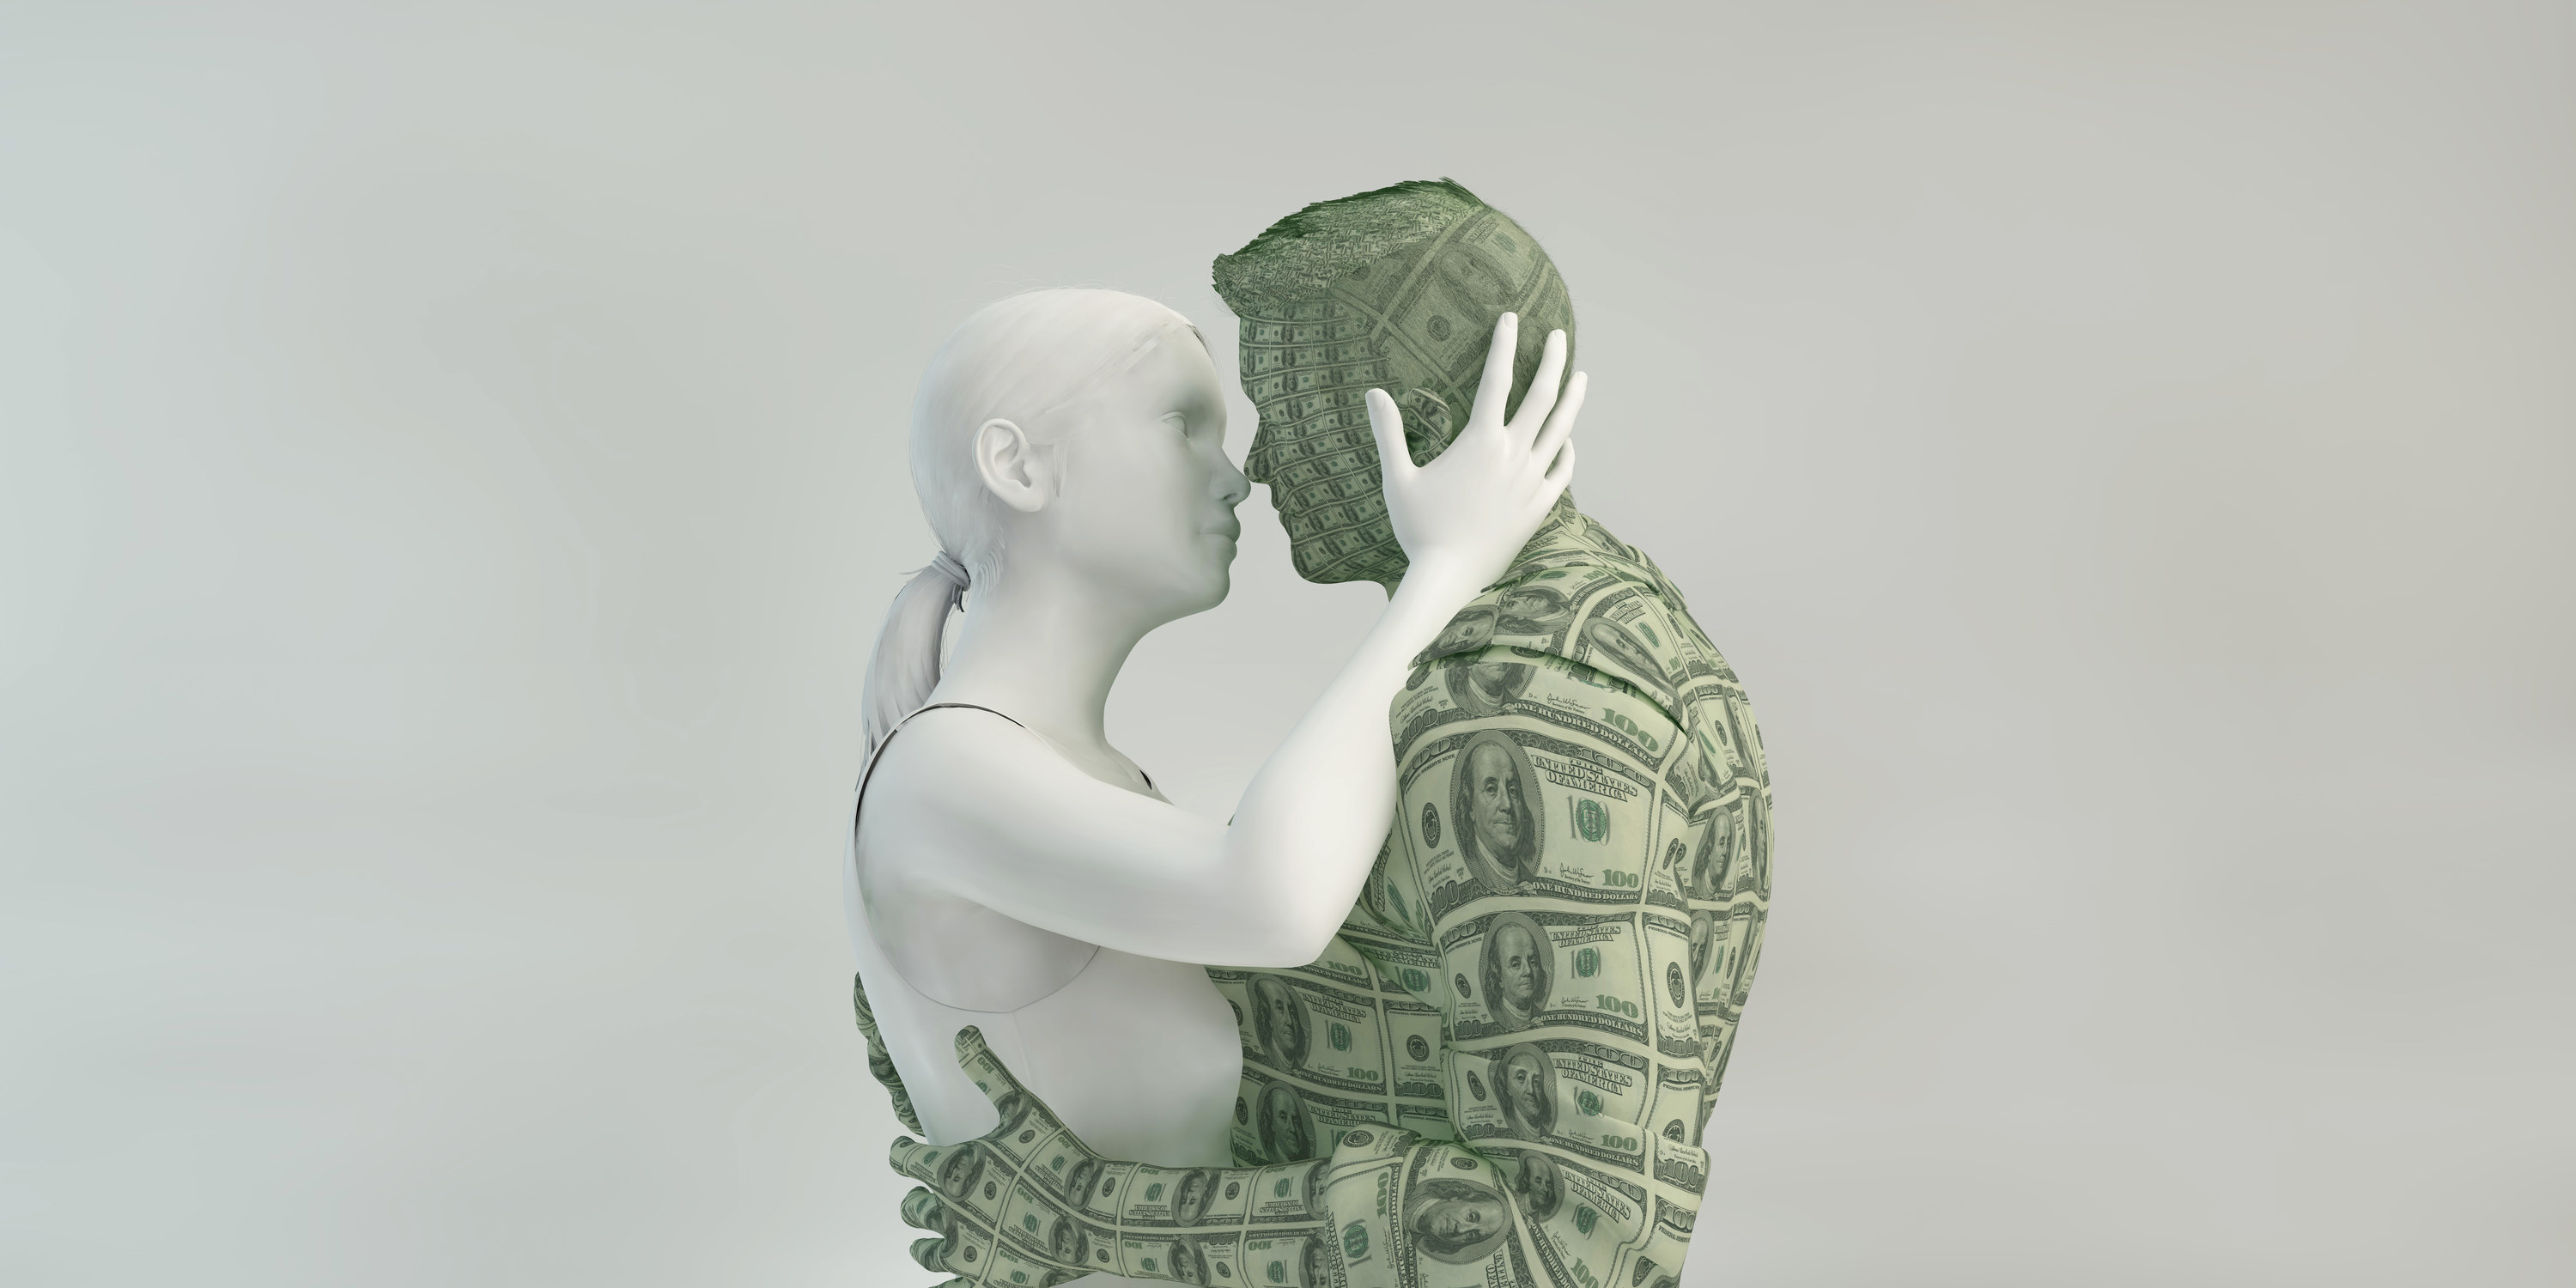 Woman made of marble is leaning in for kiss with a man made up of $100 bills.